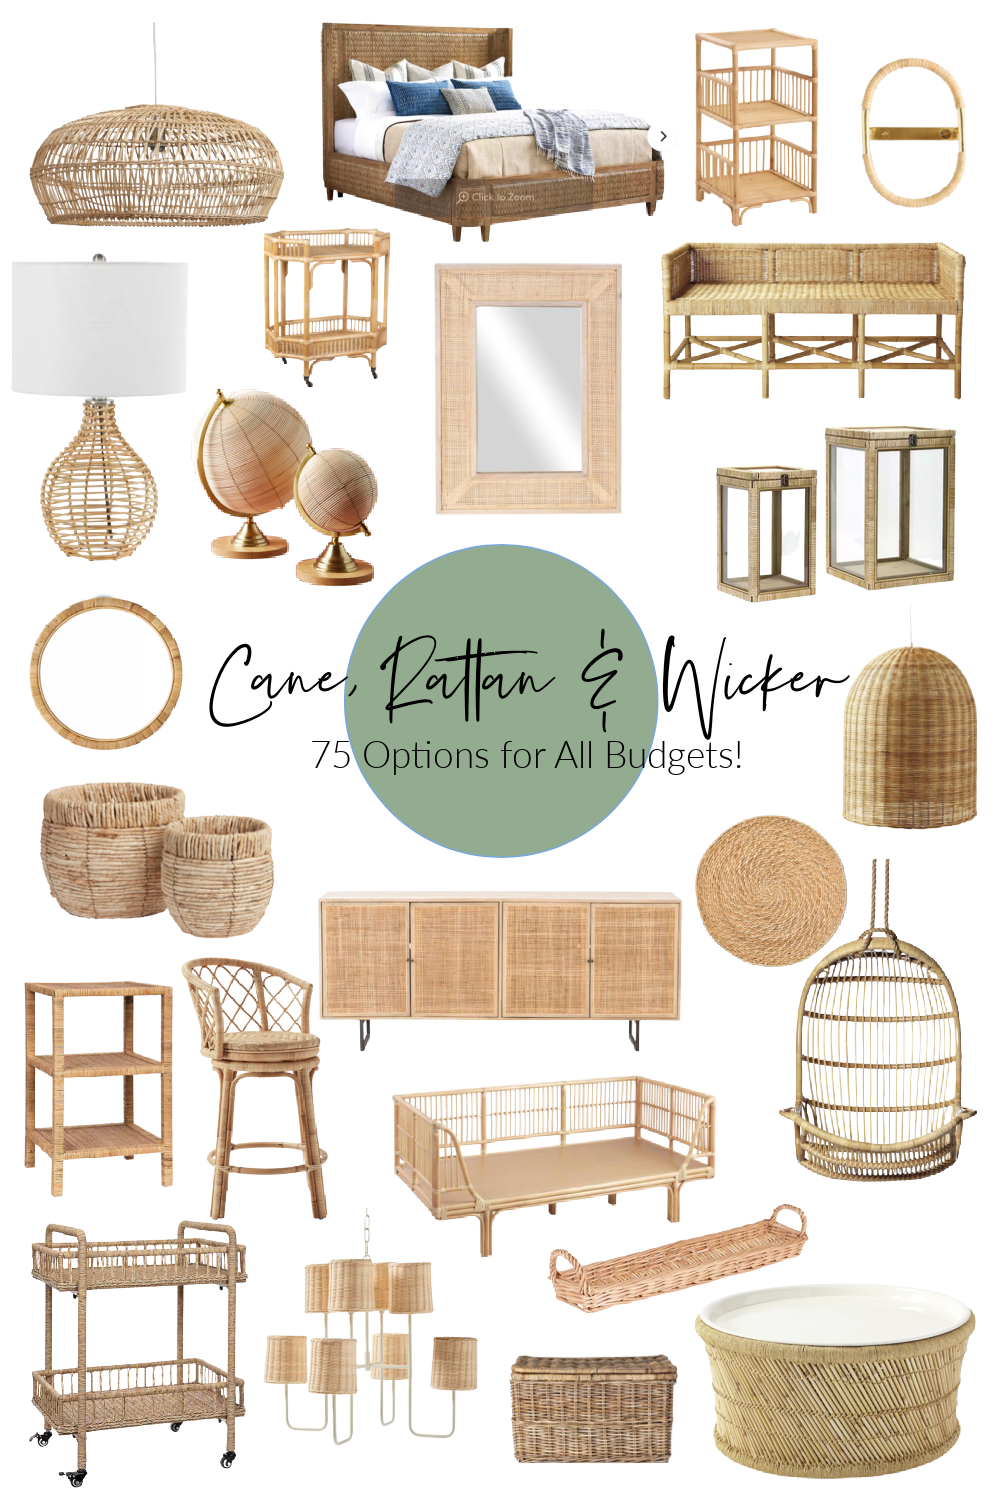 Rattan Home Decor - Decorating with Rattan Furniture - Wicker and Bamboo Furniture - Cane Rattan Chair - Rattan Furniture - Bamboo Rattan Wicker - Cane Bamboo Furniture - Rattan Accessories - Rattan Decor Ideas 